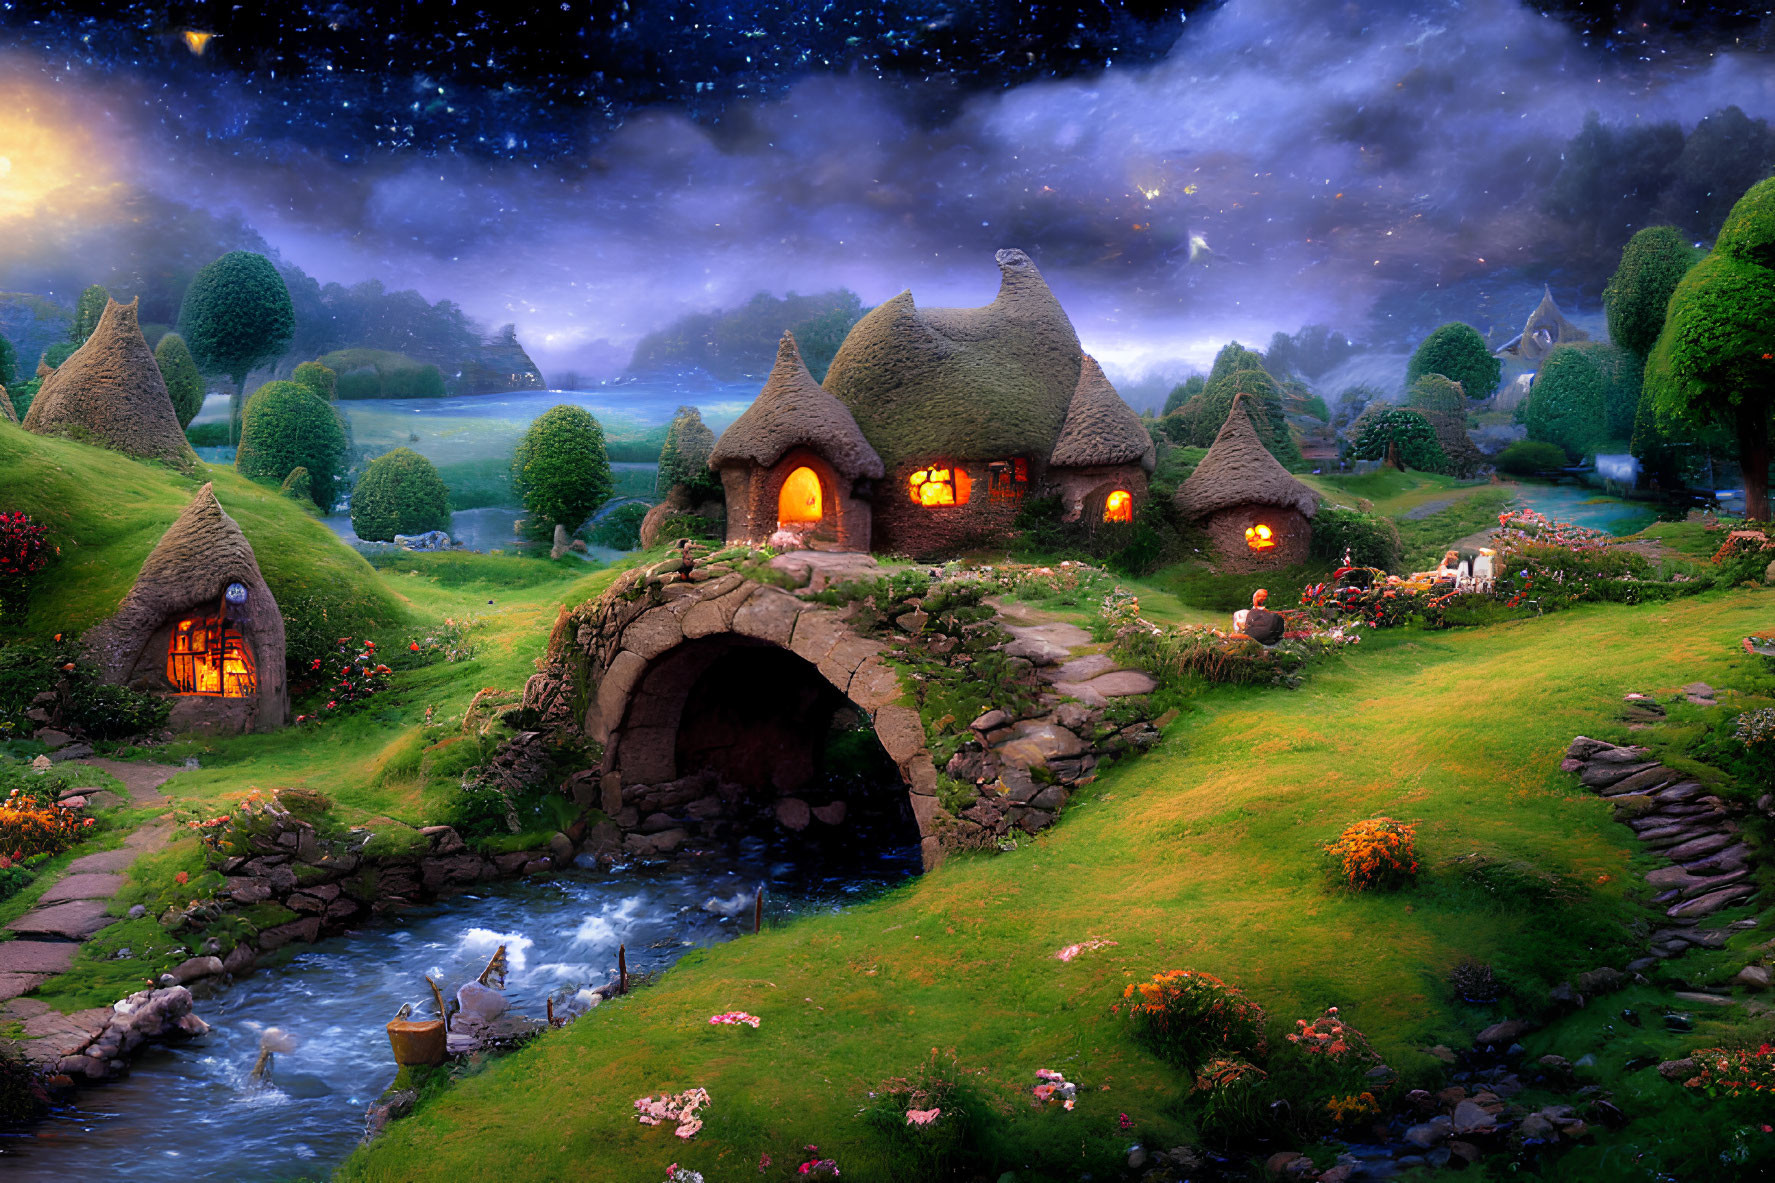 Charming village scene with thatched cottages, stone bridge, lush greenery, and starry